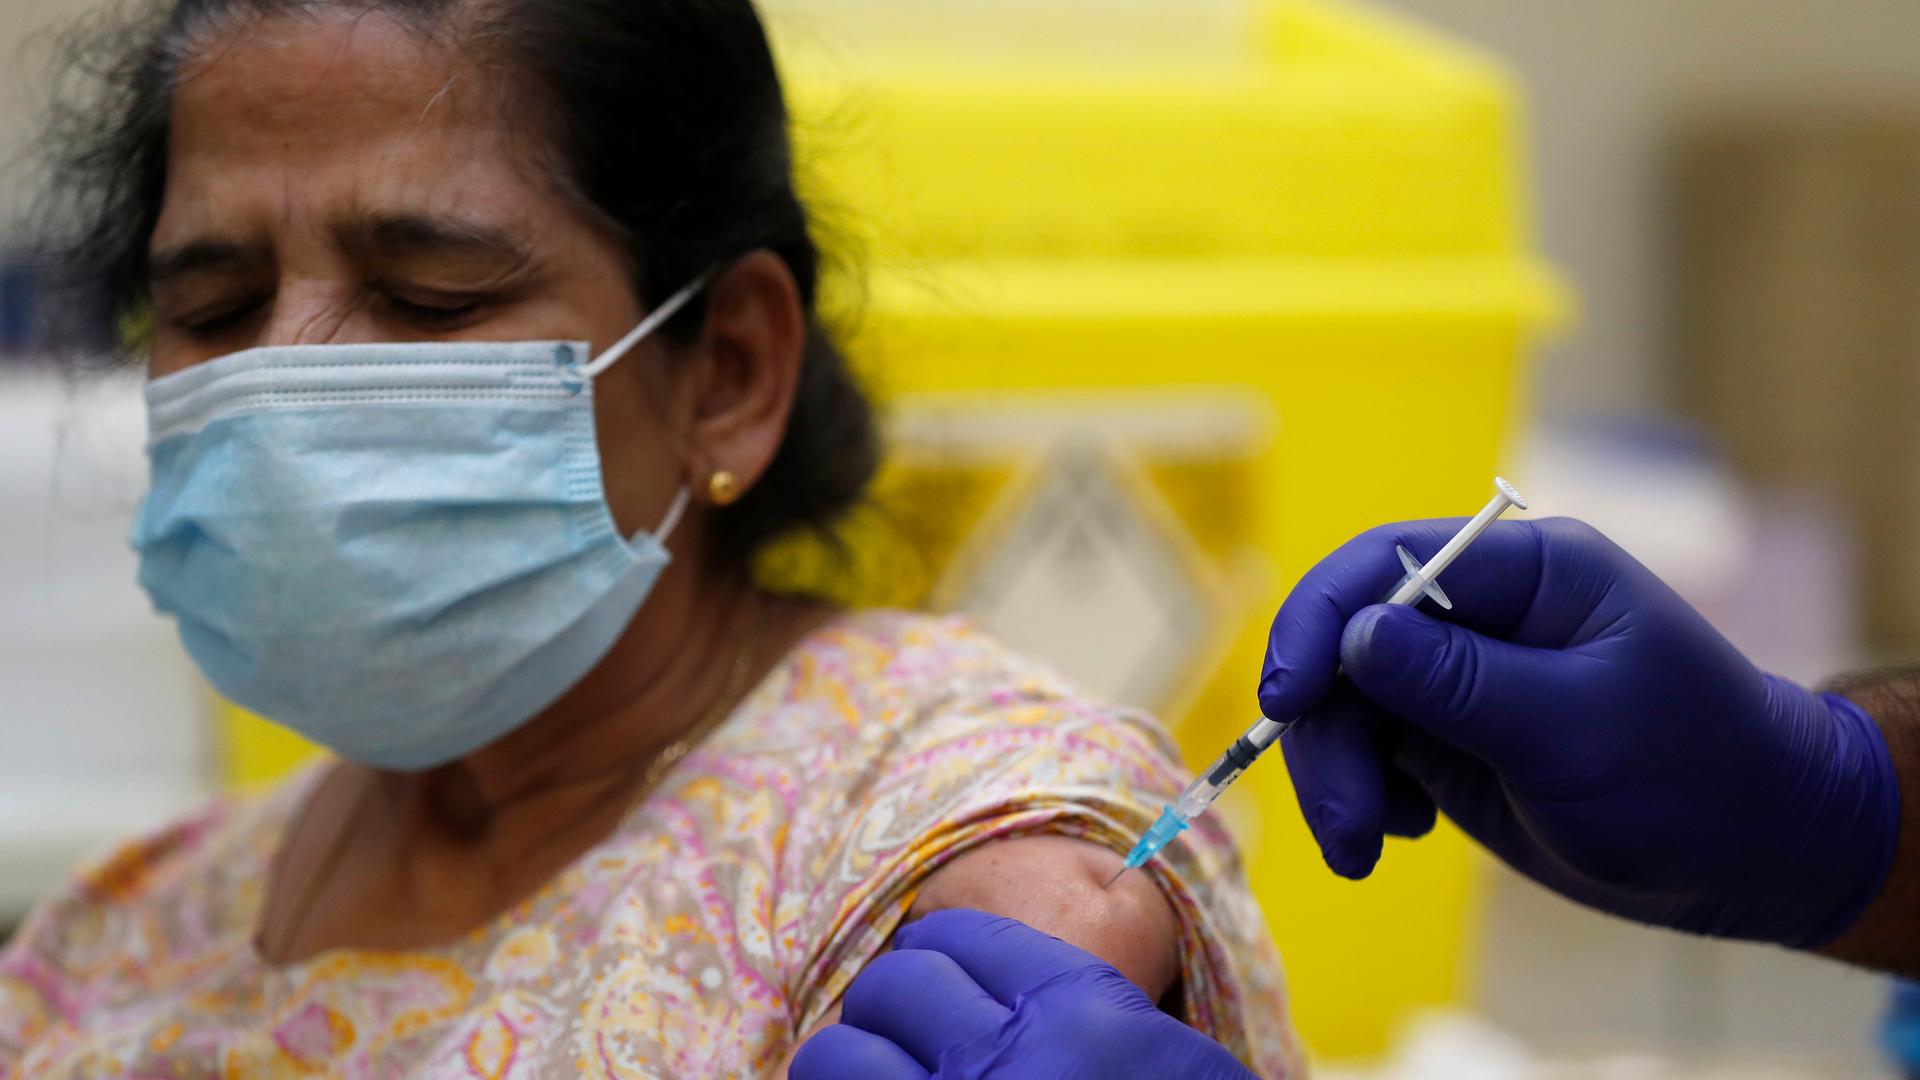 An Indian British woman wears a face mask and receives a shot in her arm with someone wearing purple gloves. 